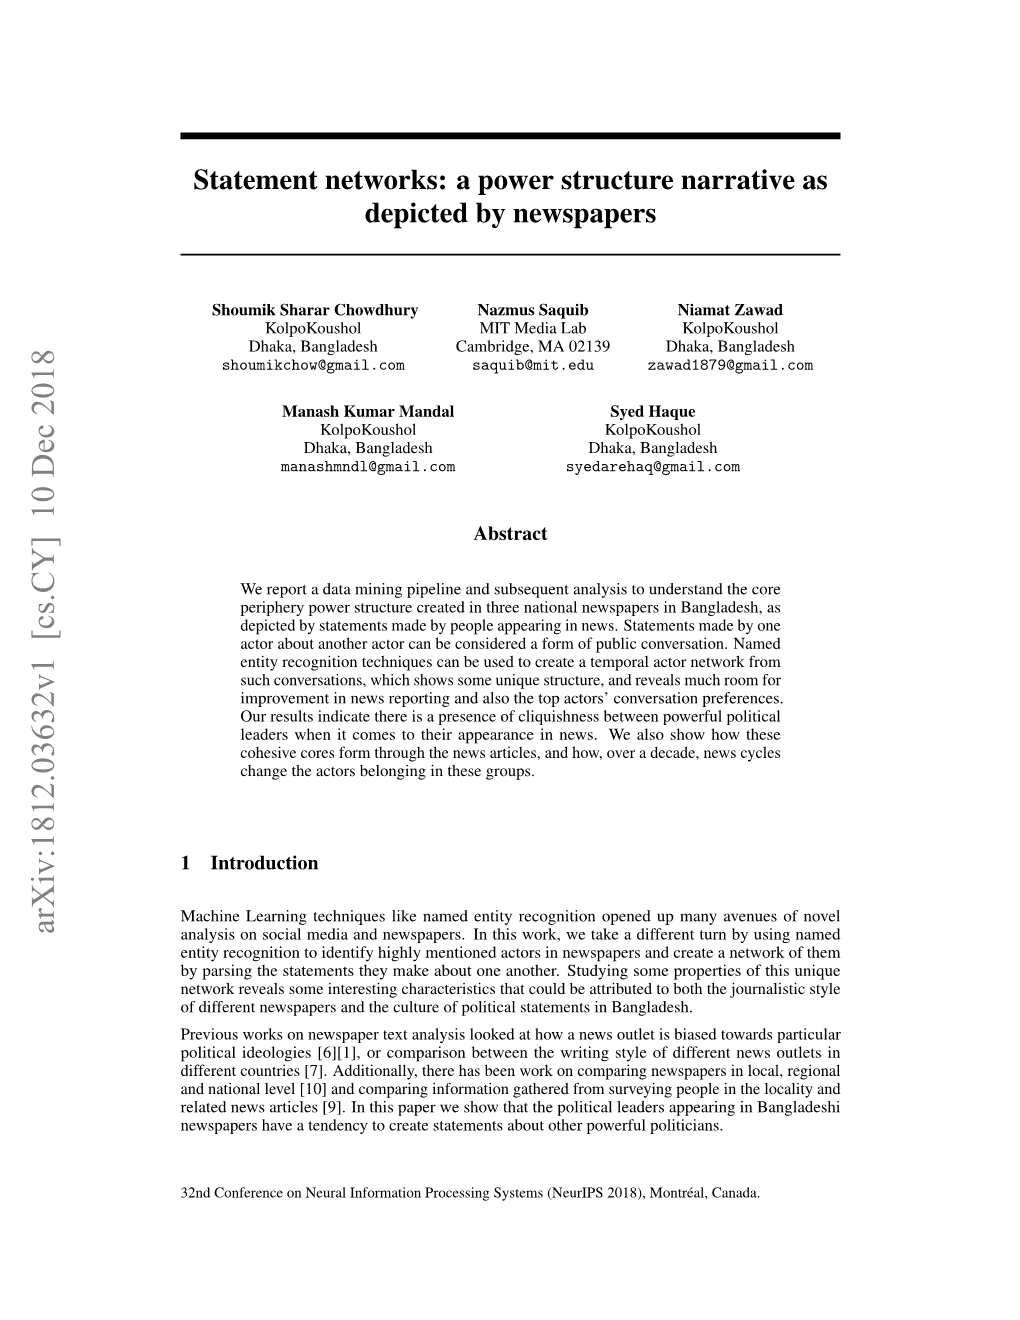 Statement Networks: a Power Structure Narrative As Depicted by Newspapers